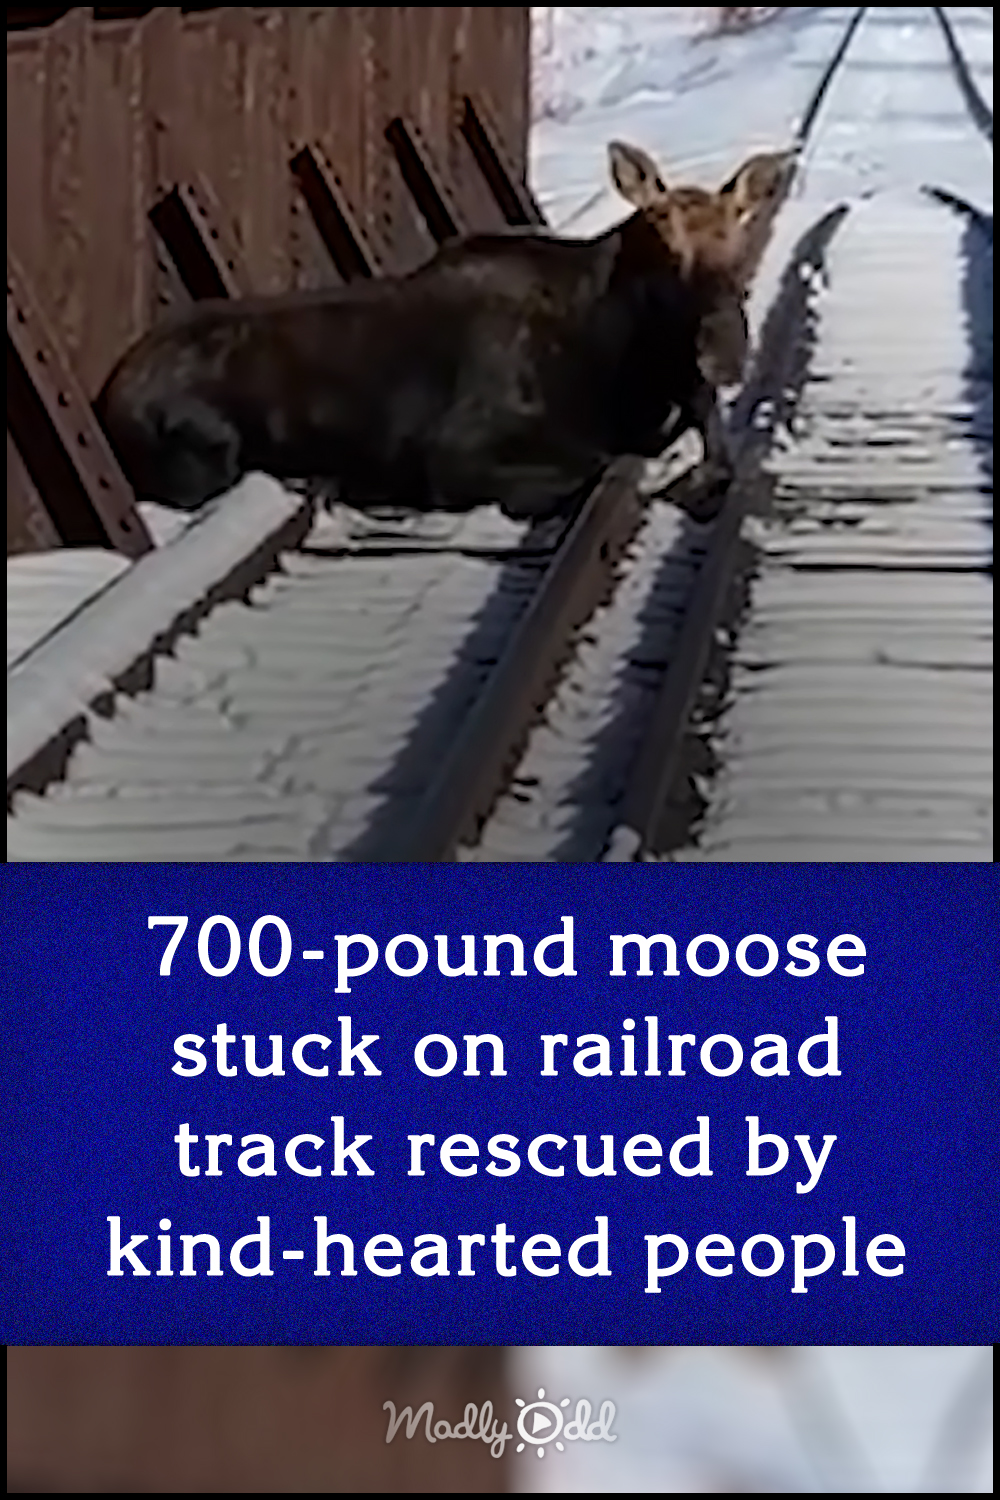 700-pound moose stuck on railroad track rescued by kind-hearted people